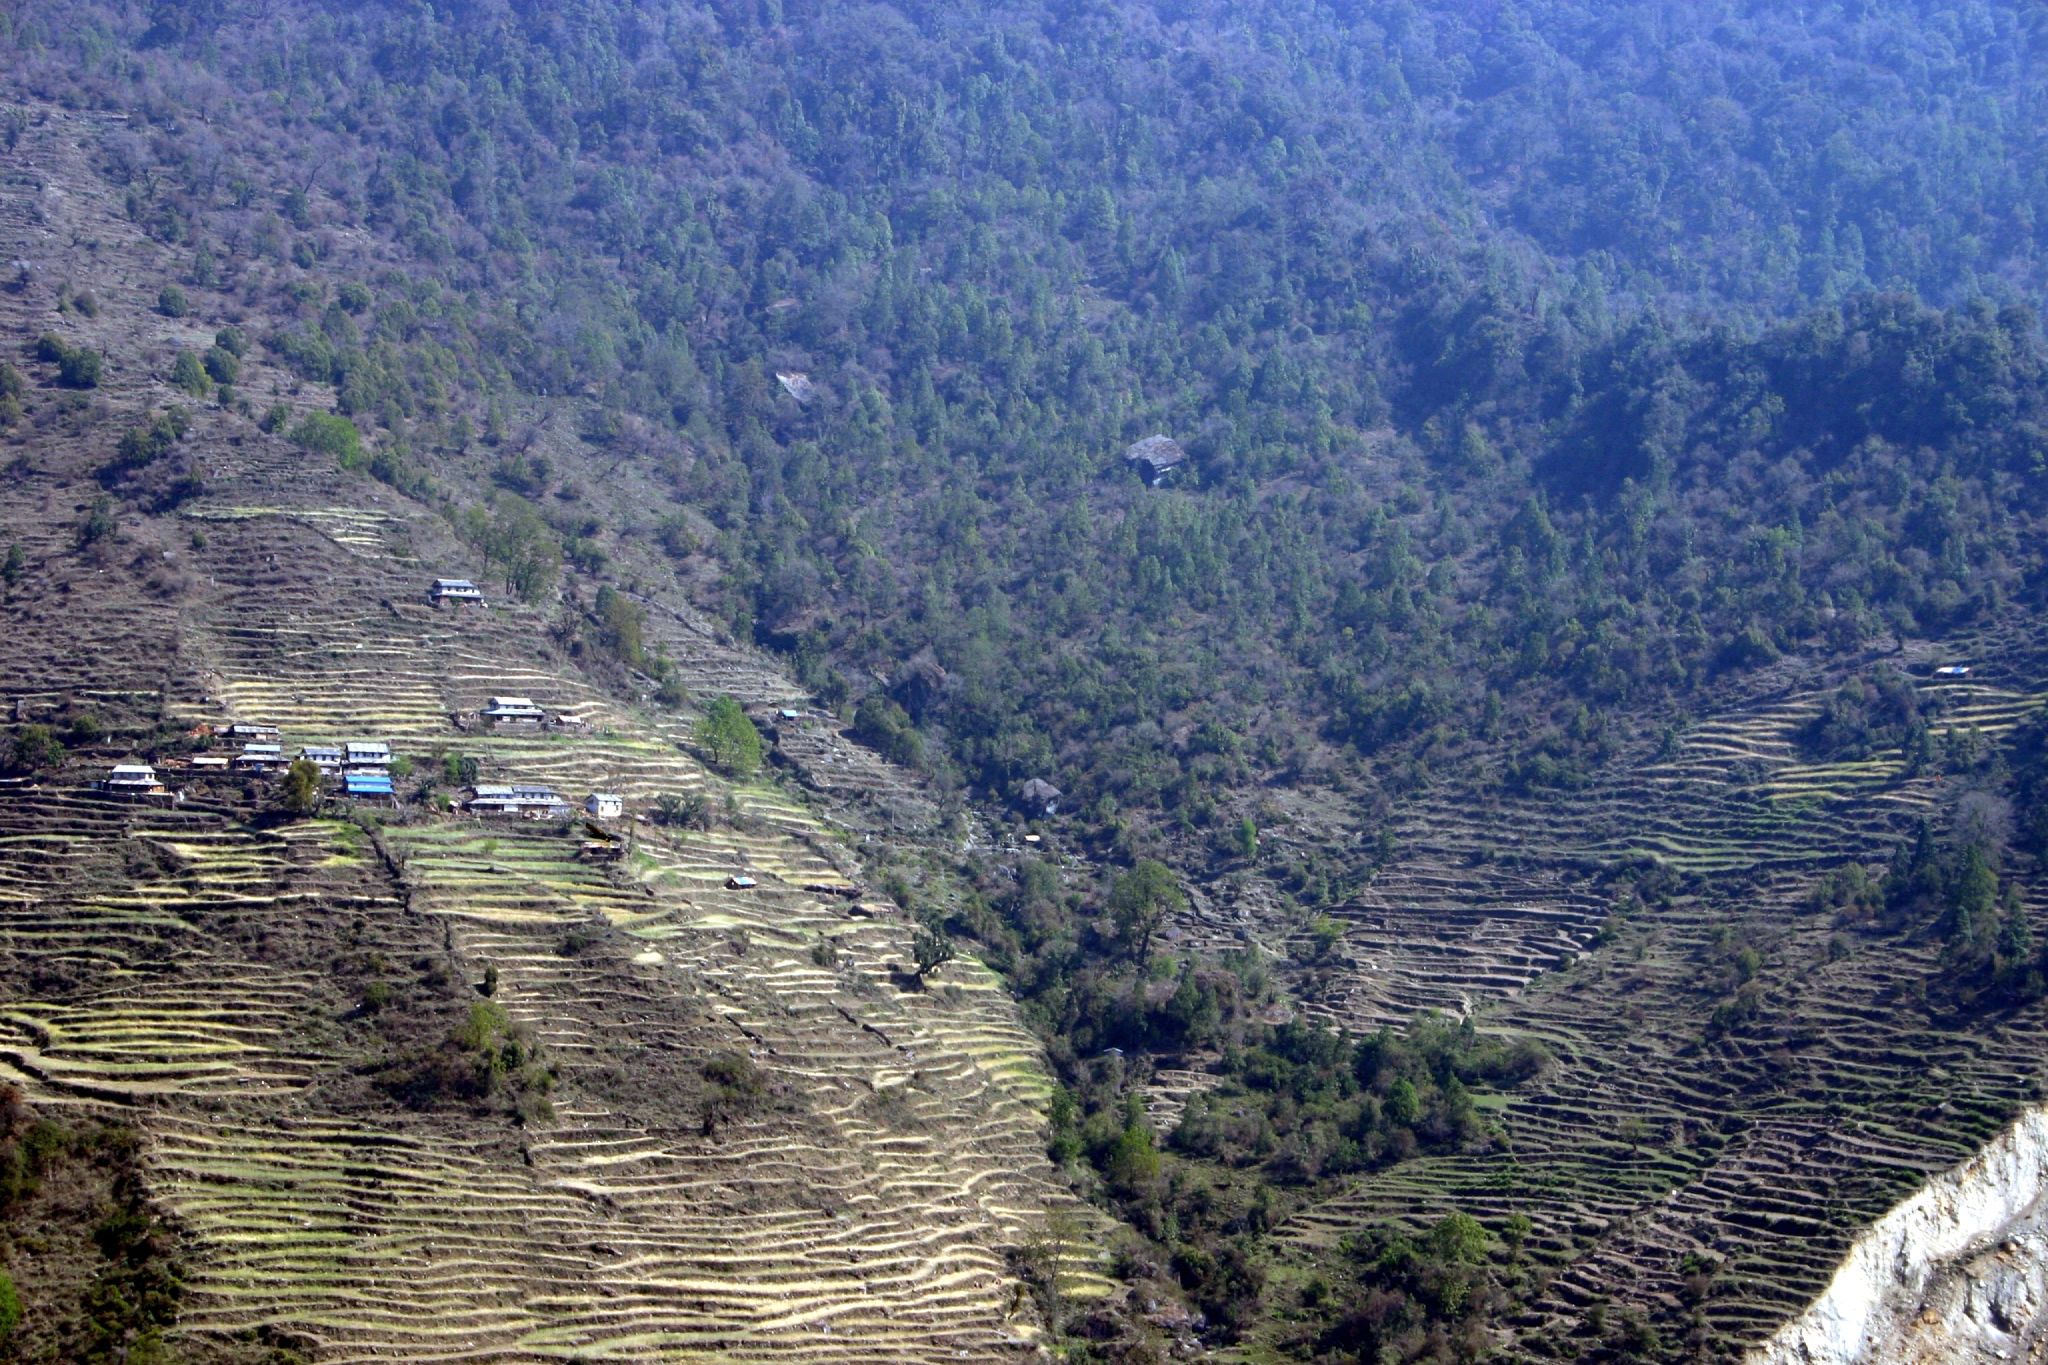 an aerial view of a small village near a mountainous area